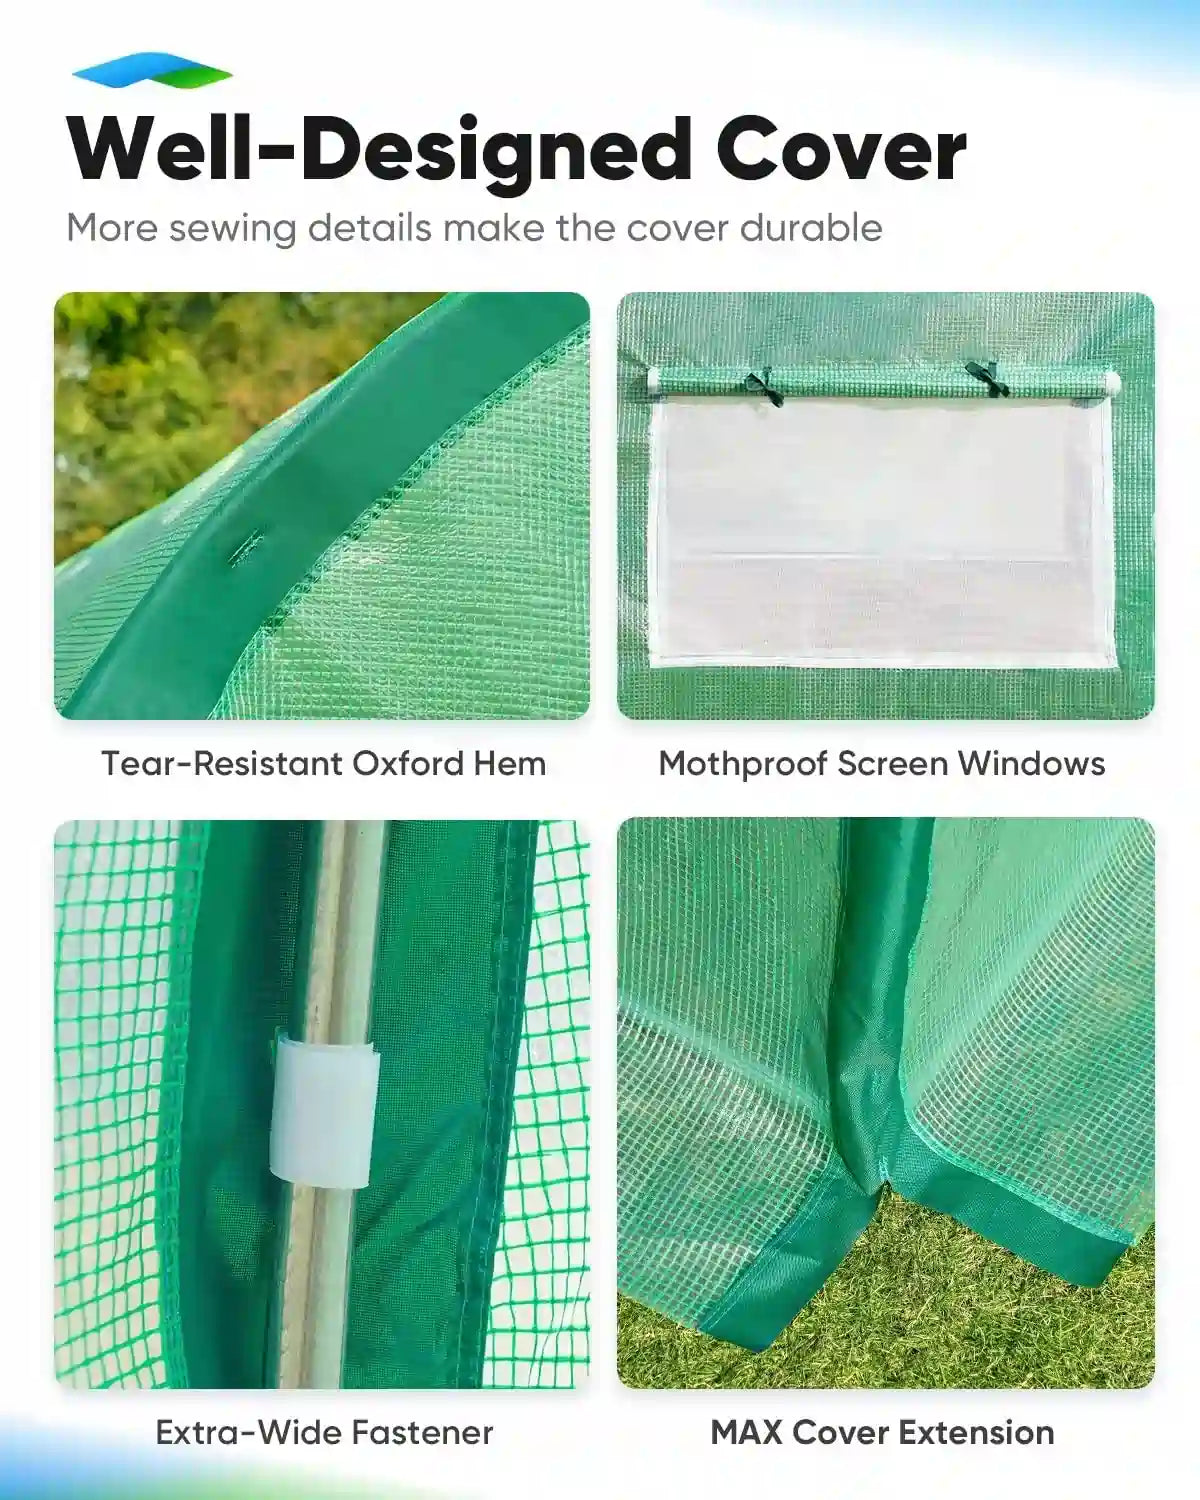 Well-designed cover#color_green